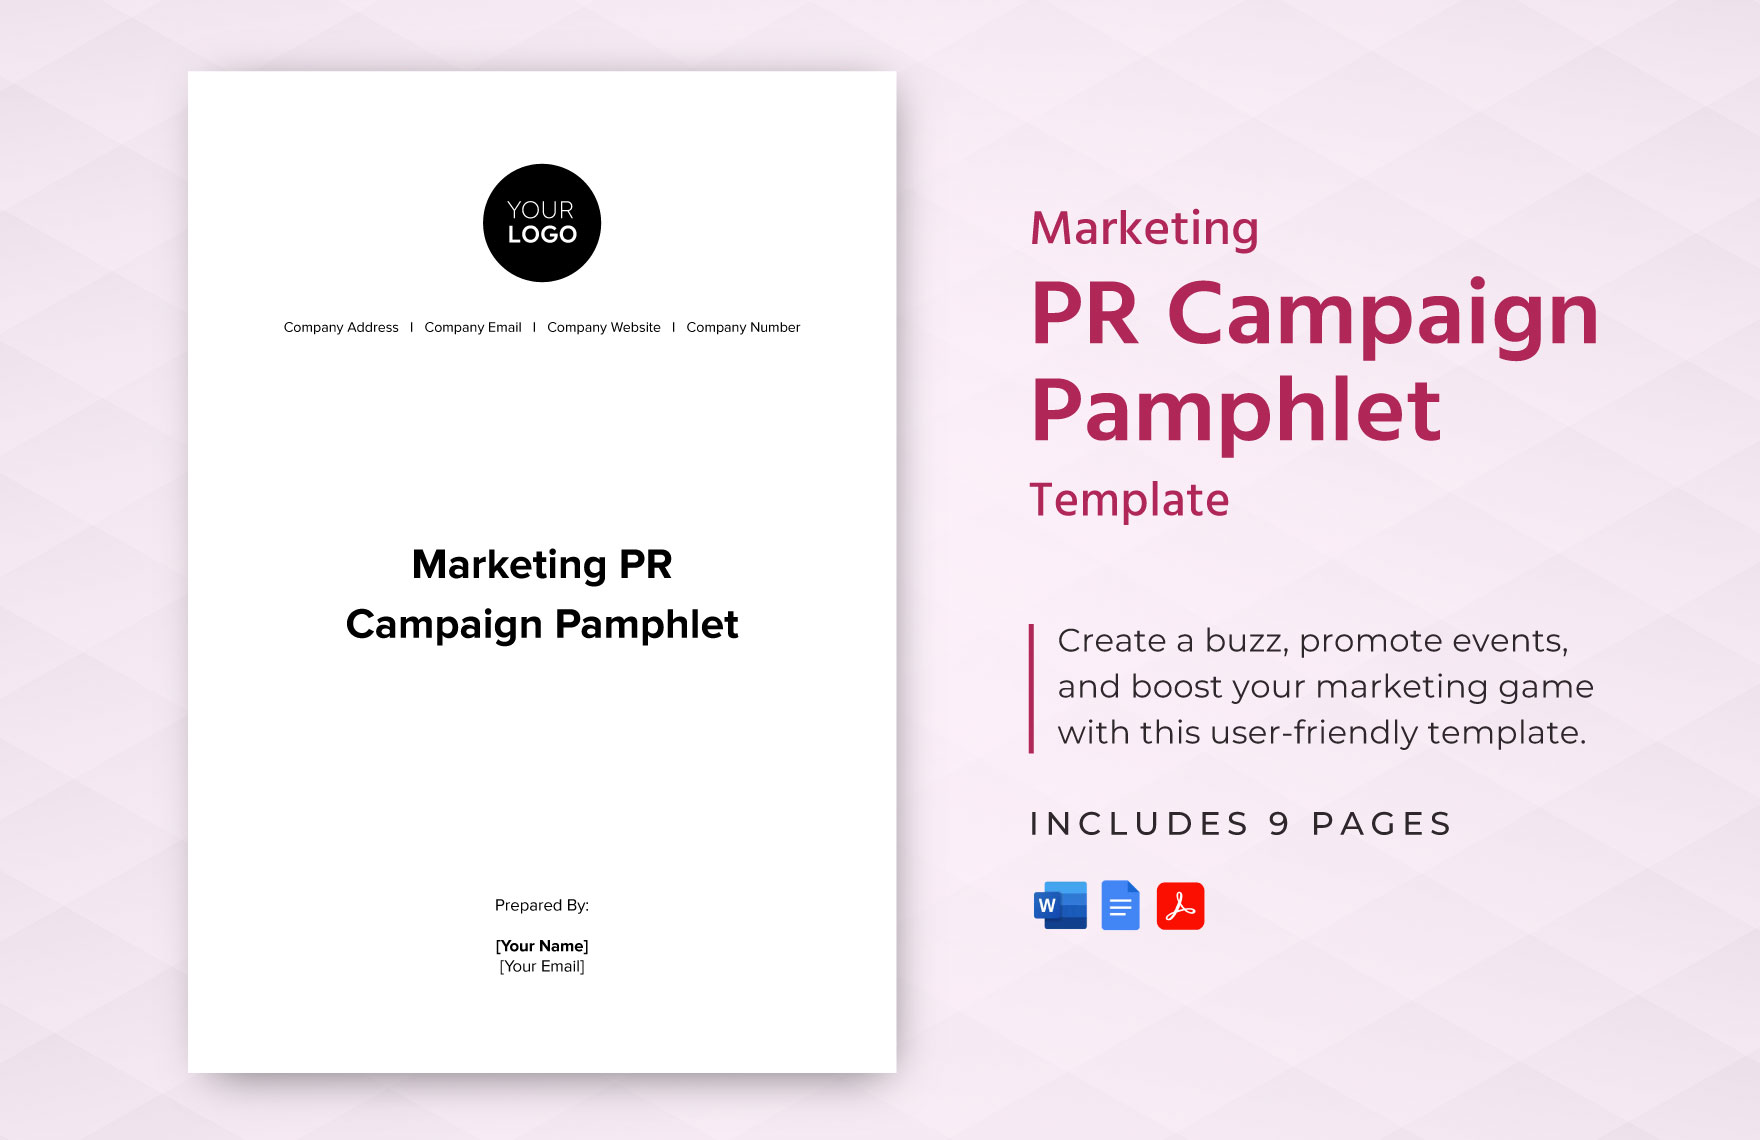 Marketing PR Campaign Pamphlet Template in Word, Google Docs, PDF